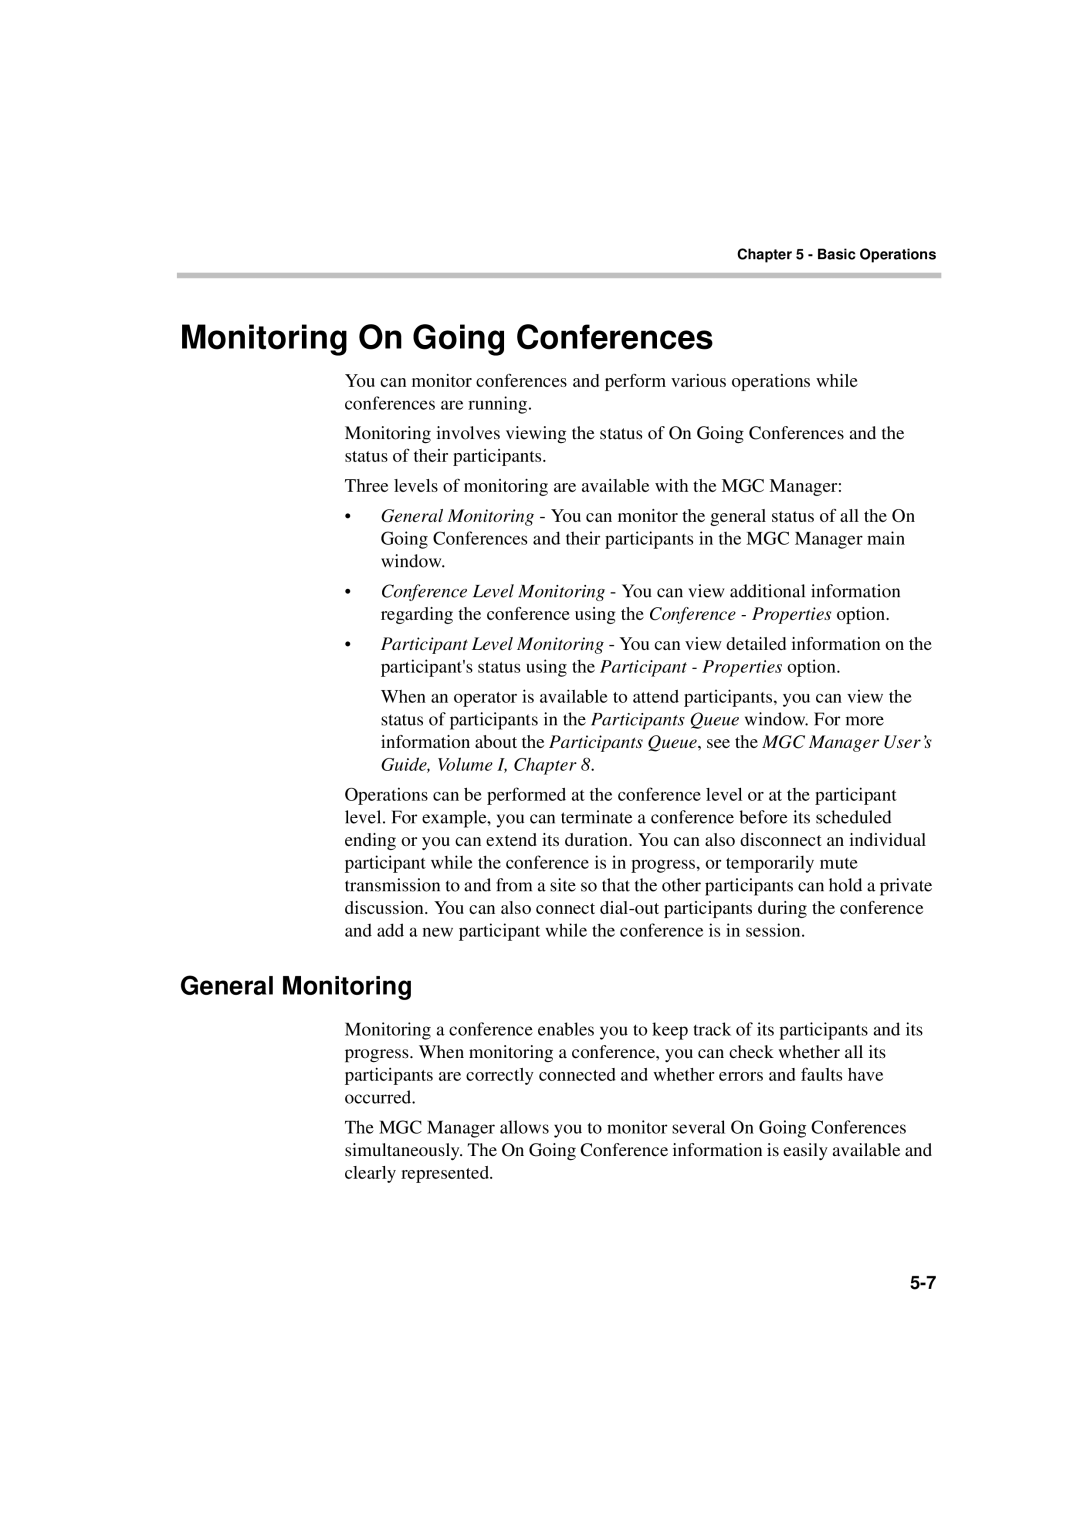 Polycom DOC2231A manual Monitoring On Going Conferences, General Monitoring 